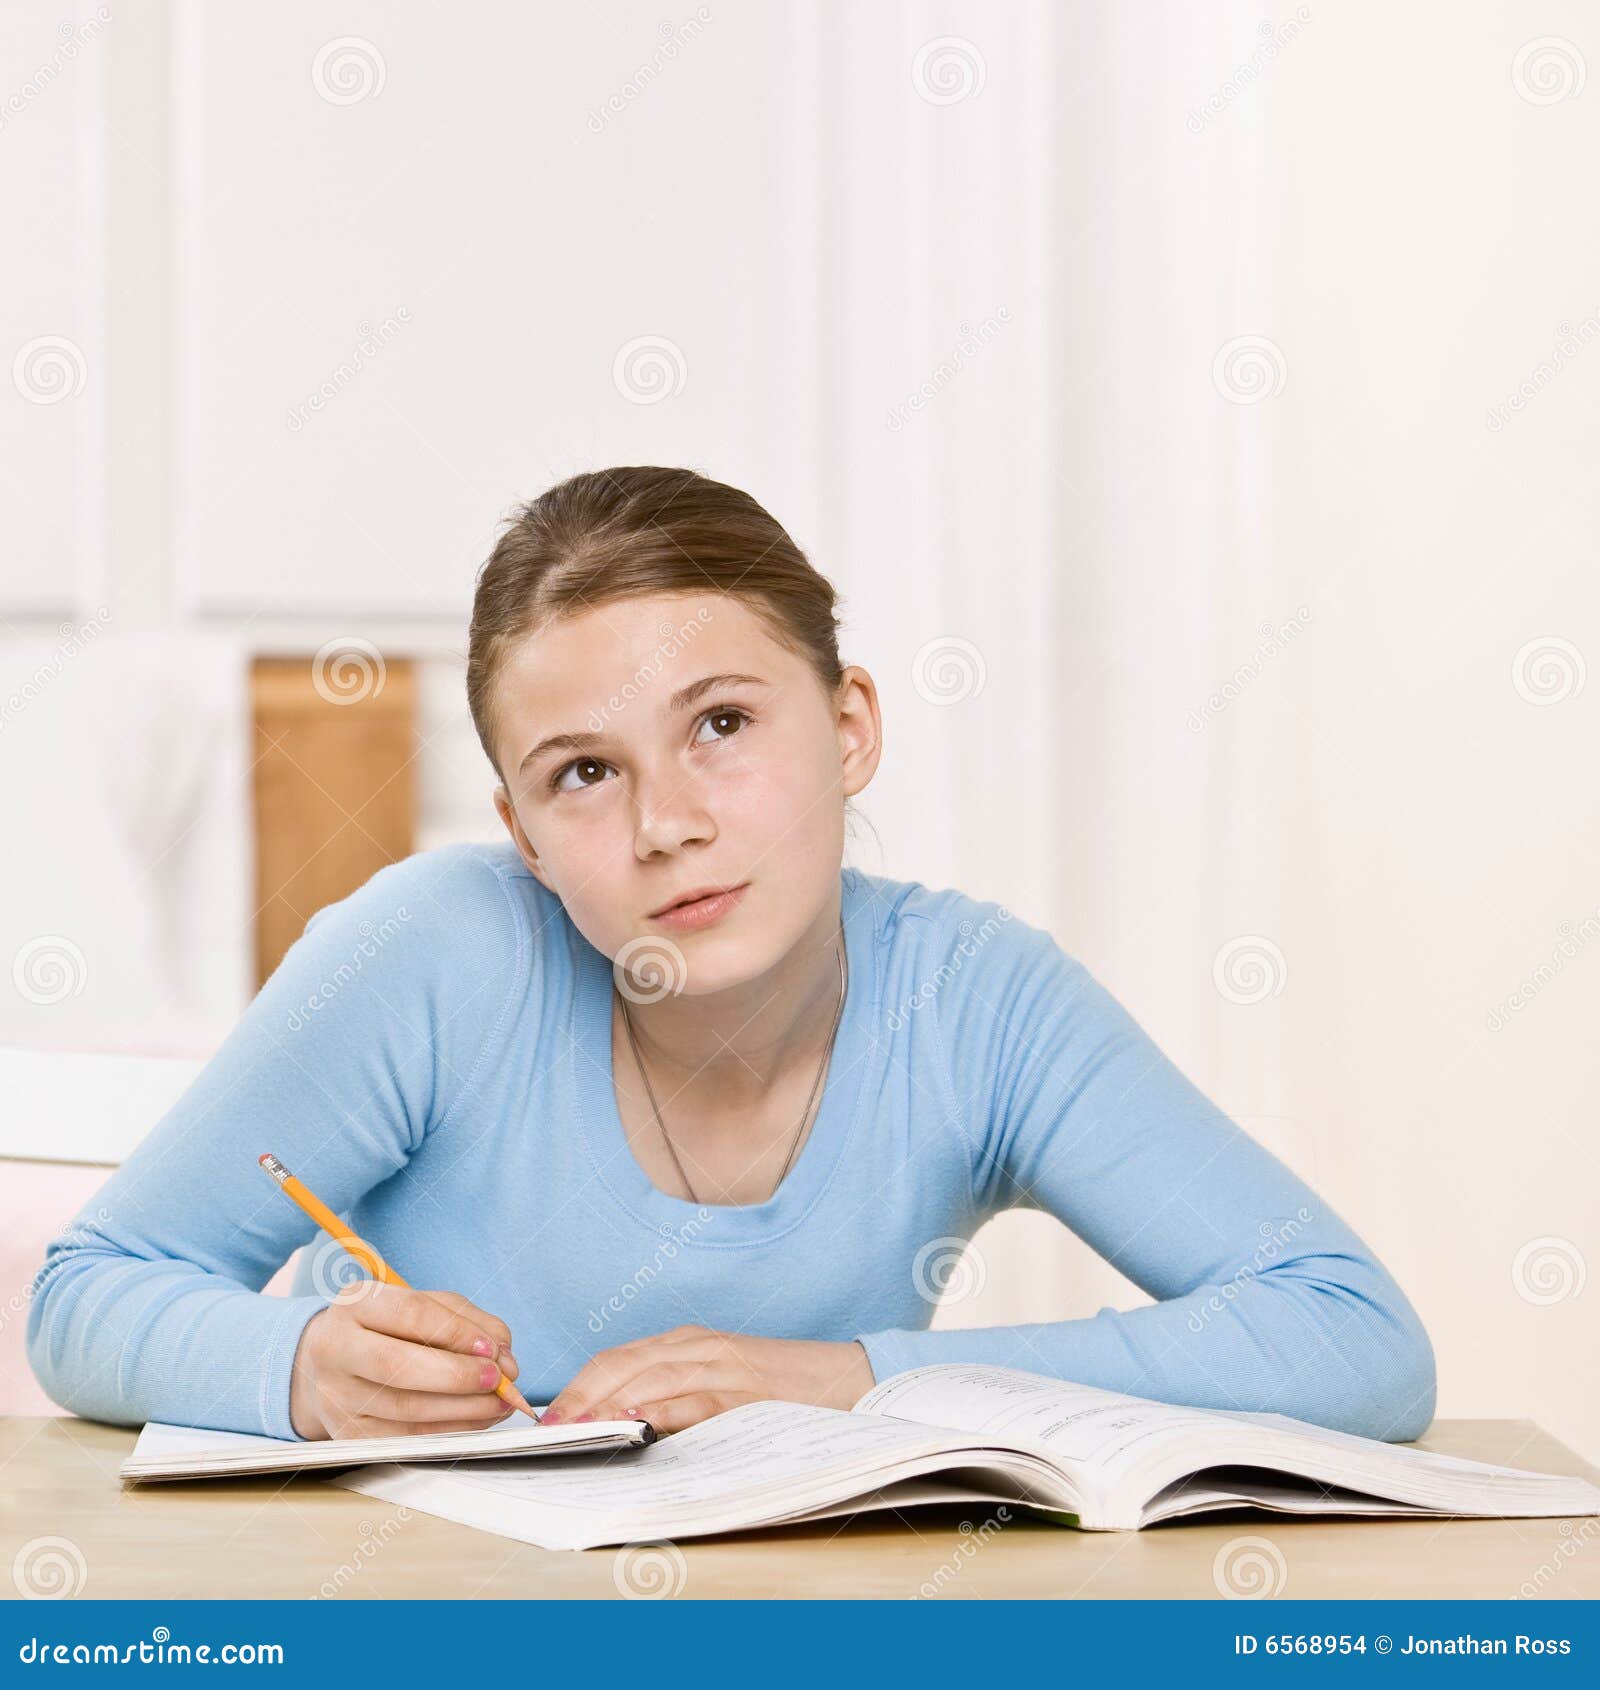 girl concentrating on homework assignment